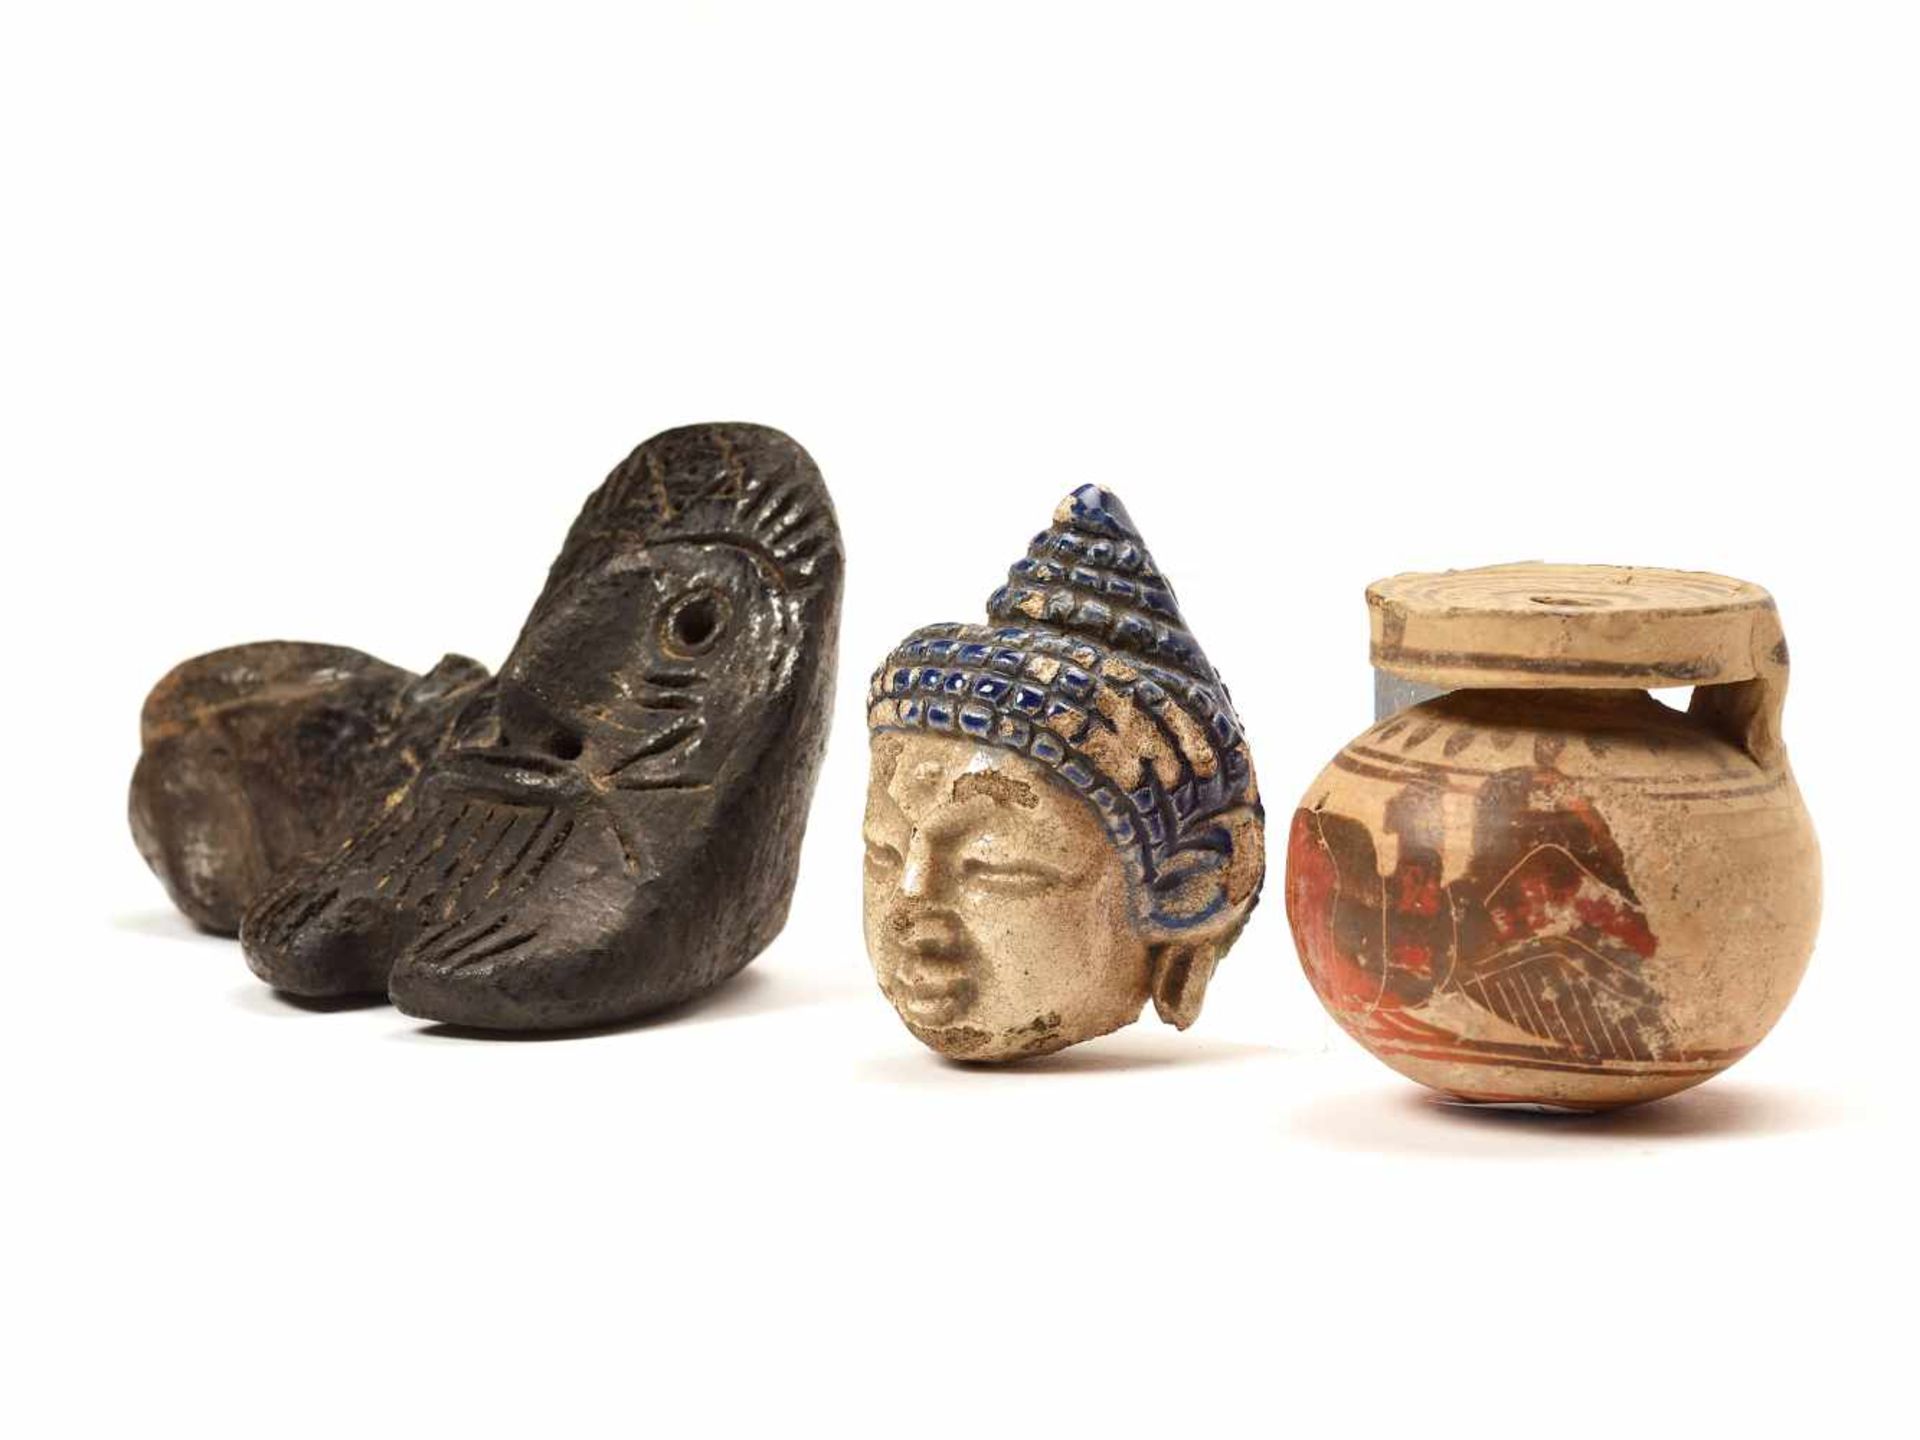 A MIXED LOT OF SMALL TERRACOTTA ITEMSA Chinese ceramic Buddha head, a pipe head of possibly Greek